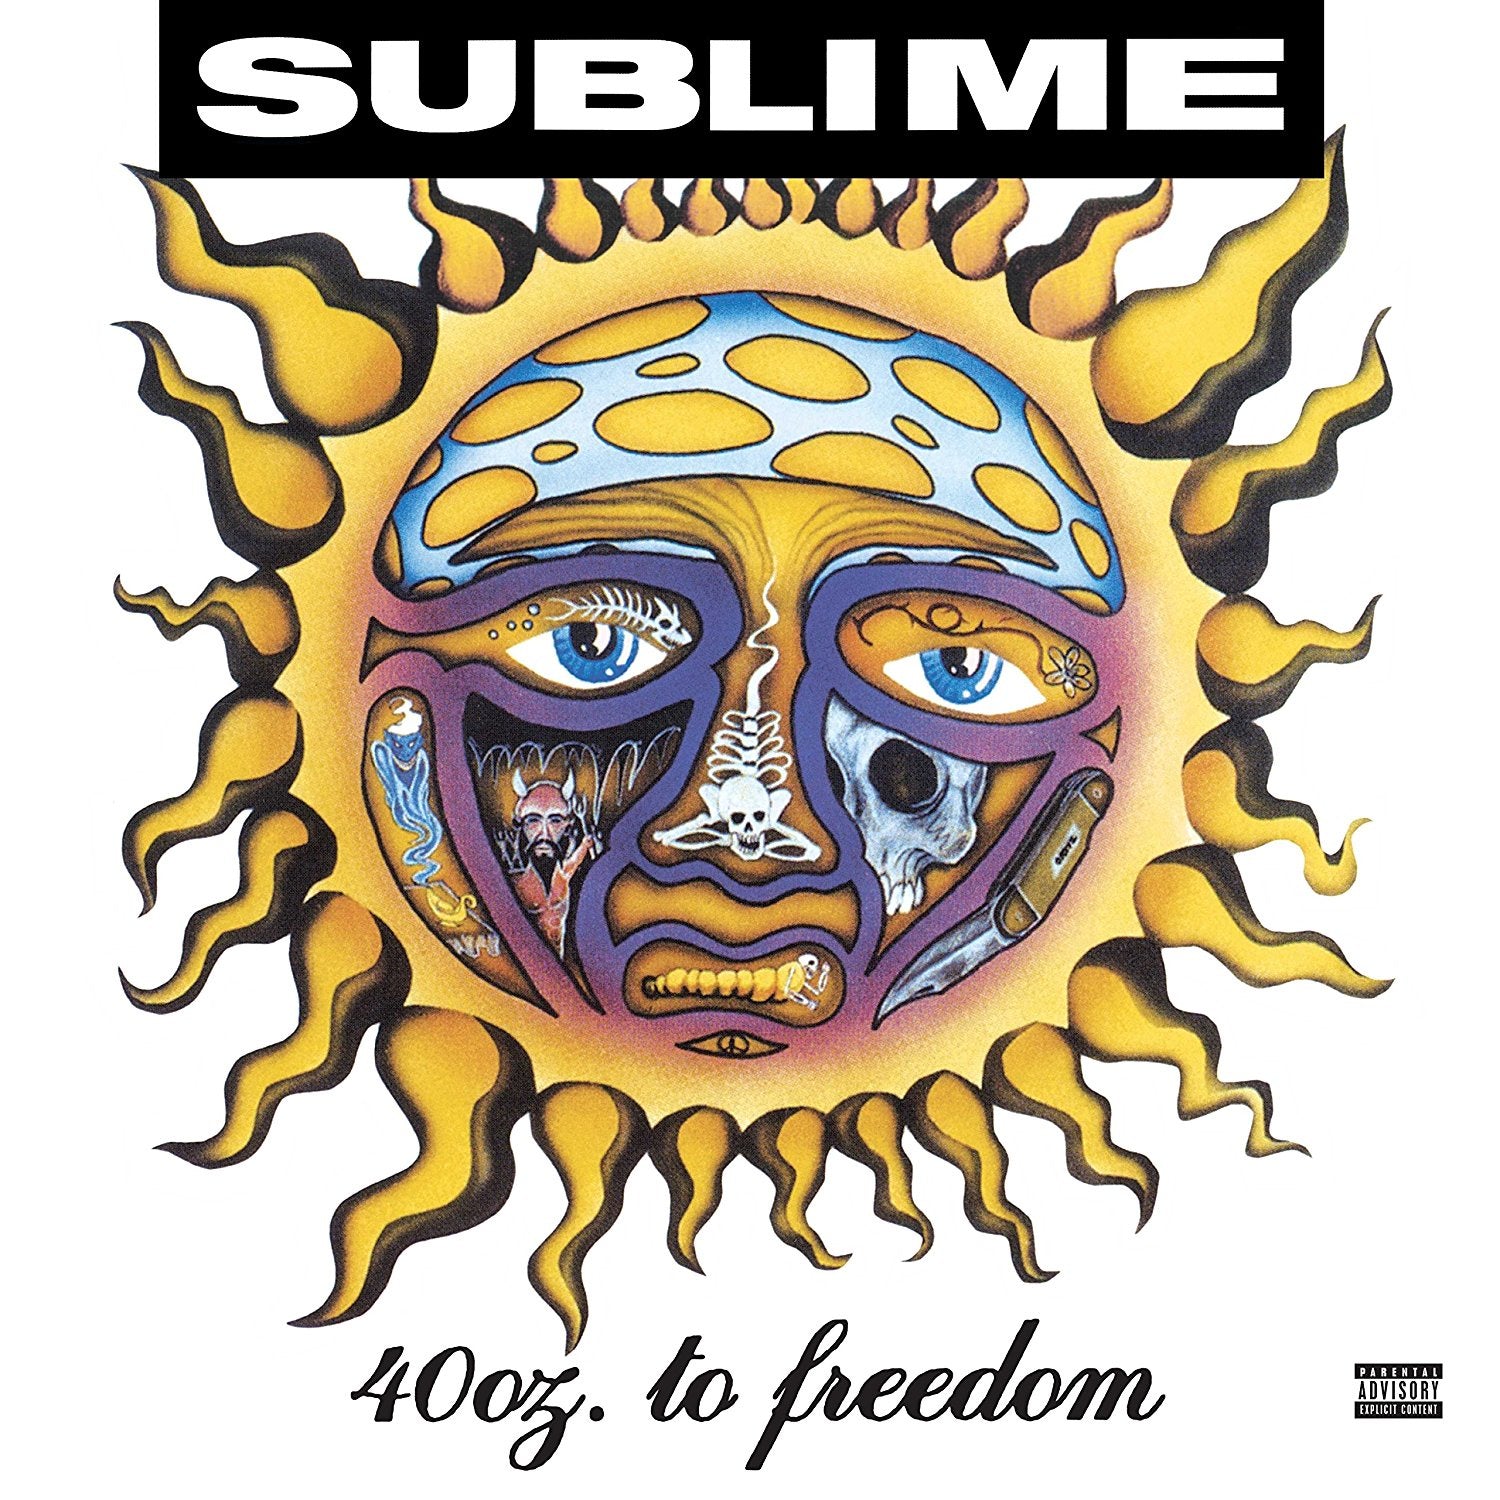 Sublime - 40oz to Freedom - New Vinyl 2017 Gasoline Alley RSD Black Friday 2LP Picture Disc Pressing (Limited to 3000) - Ska Punk